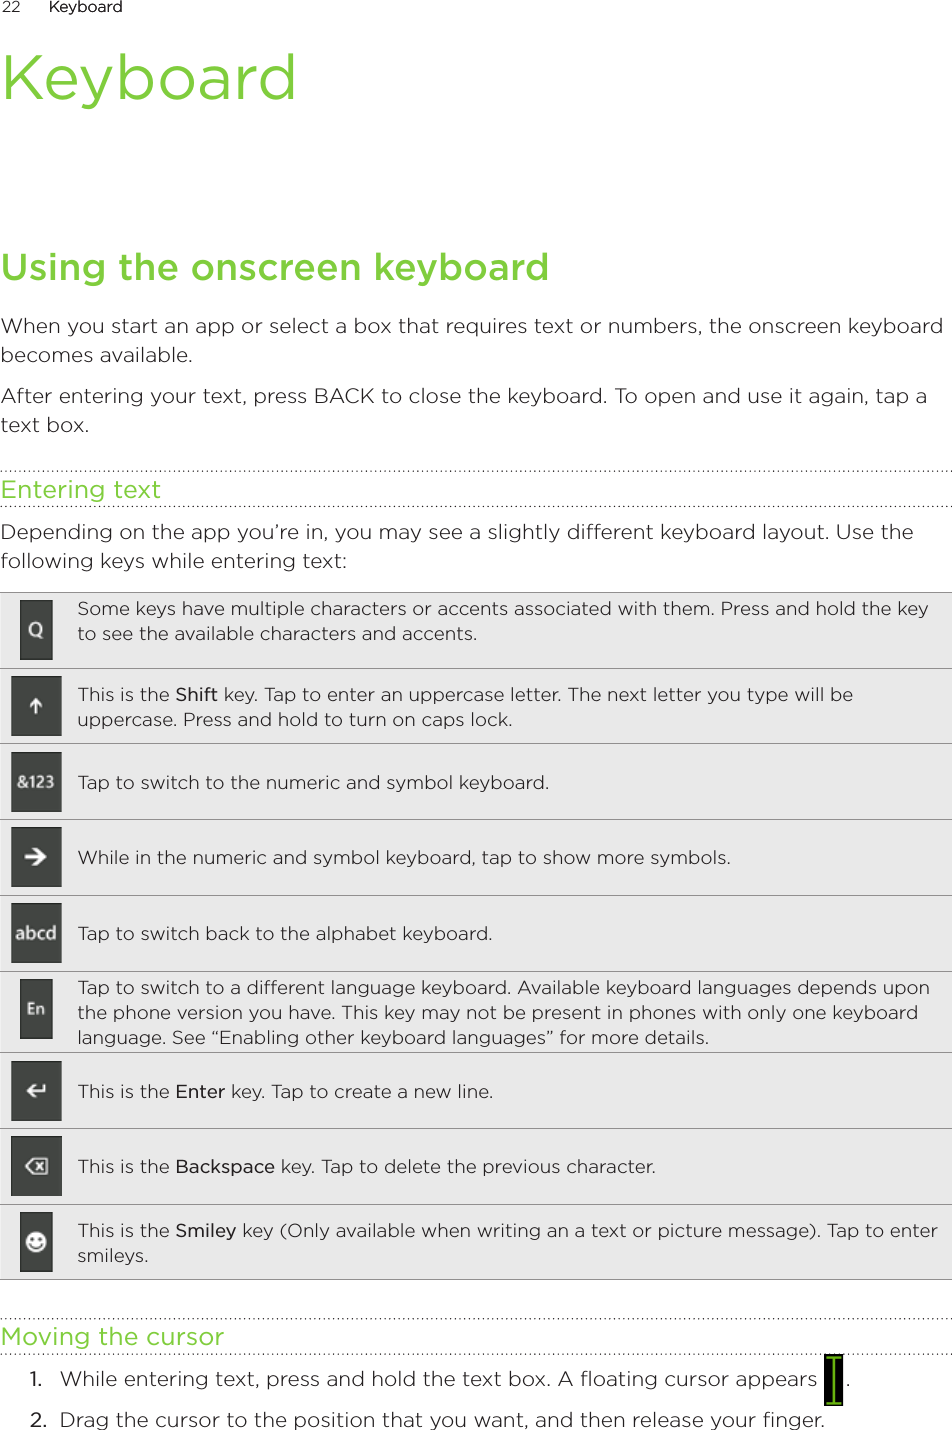 22      �eyboard�eyboard      KeyboardUsing the onscreen keyboardWhen you start an app or select a box that requires text or numbers, the onscreen keyboard becomes available.After entering your text, press BAC� to close the keyboard. To open and use it again, tap a text box.Entering textDepending on the app you’re in, you may see a slightly different keyboard layout. Use the following keys while entering text:Some keys have multiple characters or accents associated with them. Press and hold the key to see the available characters and accents.This is the Shift key. Tap to enter an uppercase letter. The next letter you type will be uppercase. Press and hold to turn on caps lock. Tap to switch to the numeric and symbol keyboard.While in the numeric and symbol keyboard, tap to show more symbols.Tap to switch back to the alphabet keyboard.Tap to switch to a different language keyboard. Available keyboard languages depends upon the phone version you have. This key may not be present in phones with only one keyboard language. See “Enabling other keyboard languages” for more details.This is the Enter key. Tap to create a new line.This is the Backspace key. Tap to delete the previous character.This is the Smiley key (Only available when writing an a text or picture message). Tap to enter smileys.Moving the cursorWhile entering text, press and hold the text box. A floating cursor appears   .Drag the cursor to the position that you want, and then release your finger. 1.2.